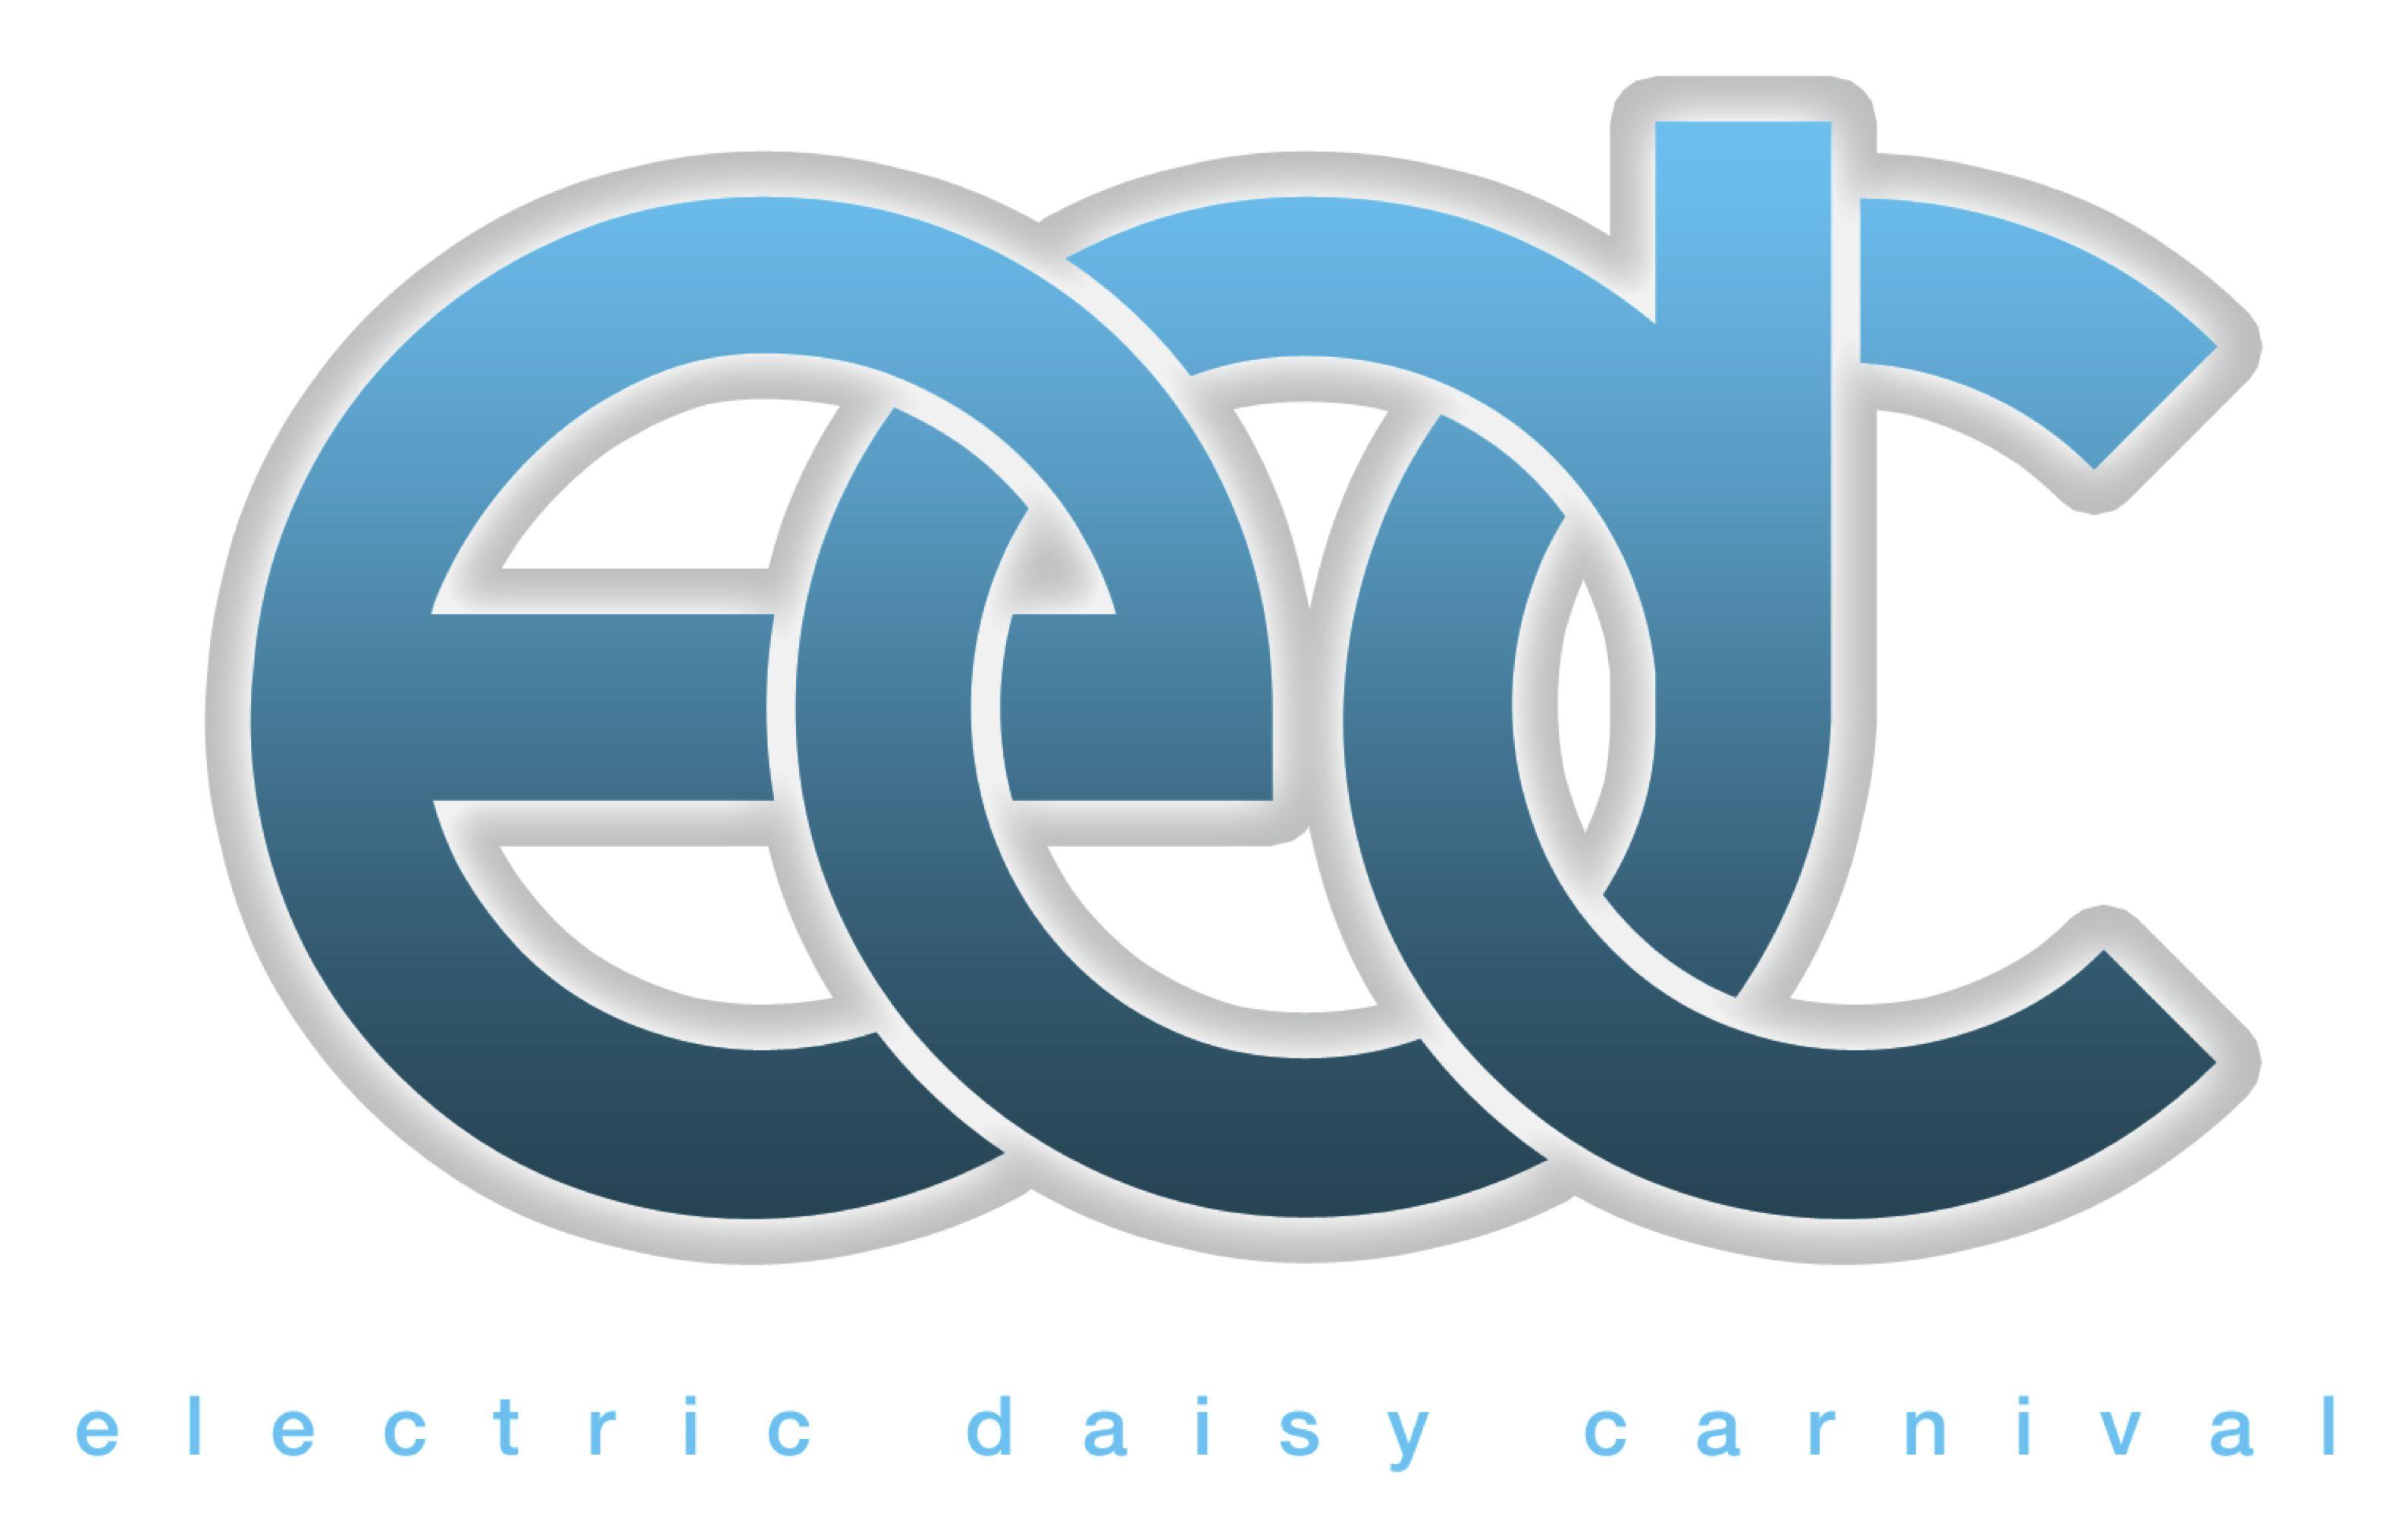 EDC Logo - Electric Daisy Carnival | My kind of thing | Electric daisy festival ...